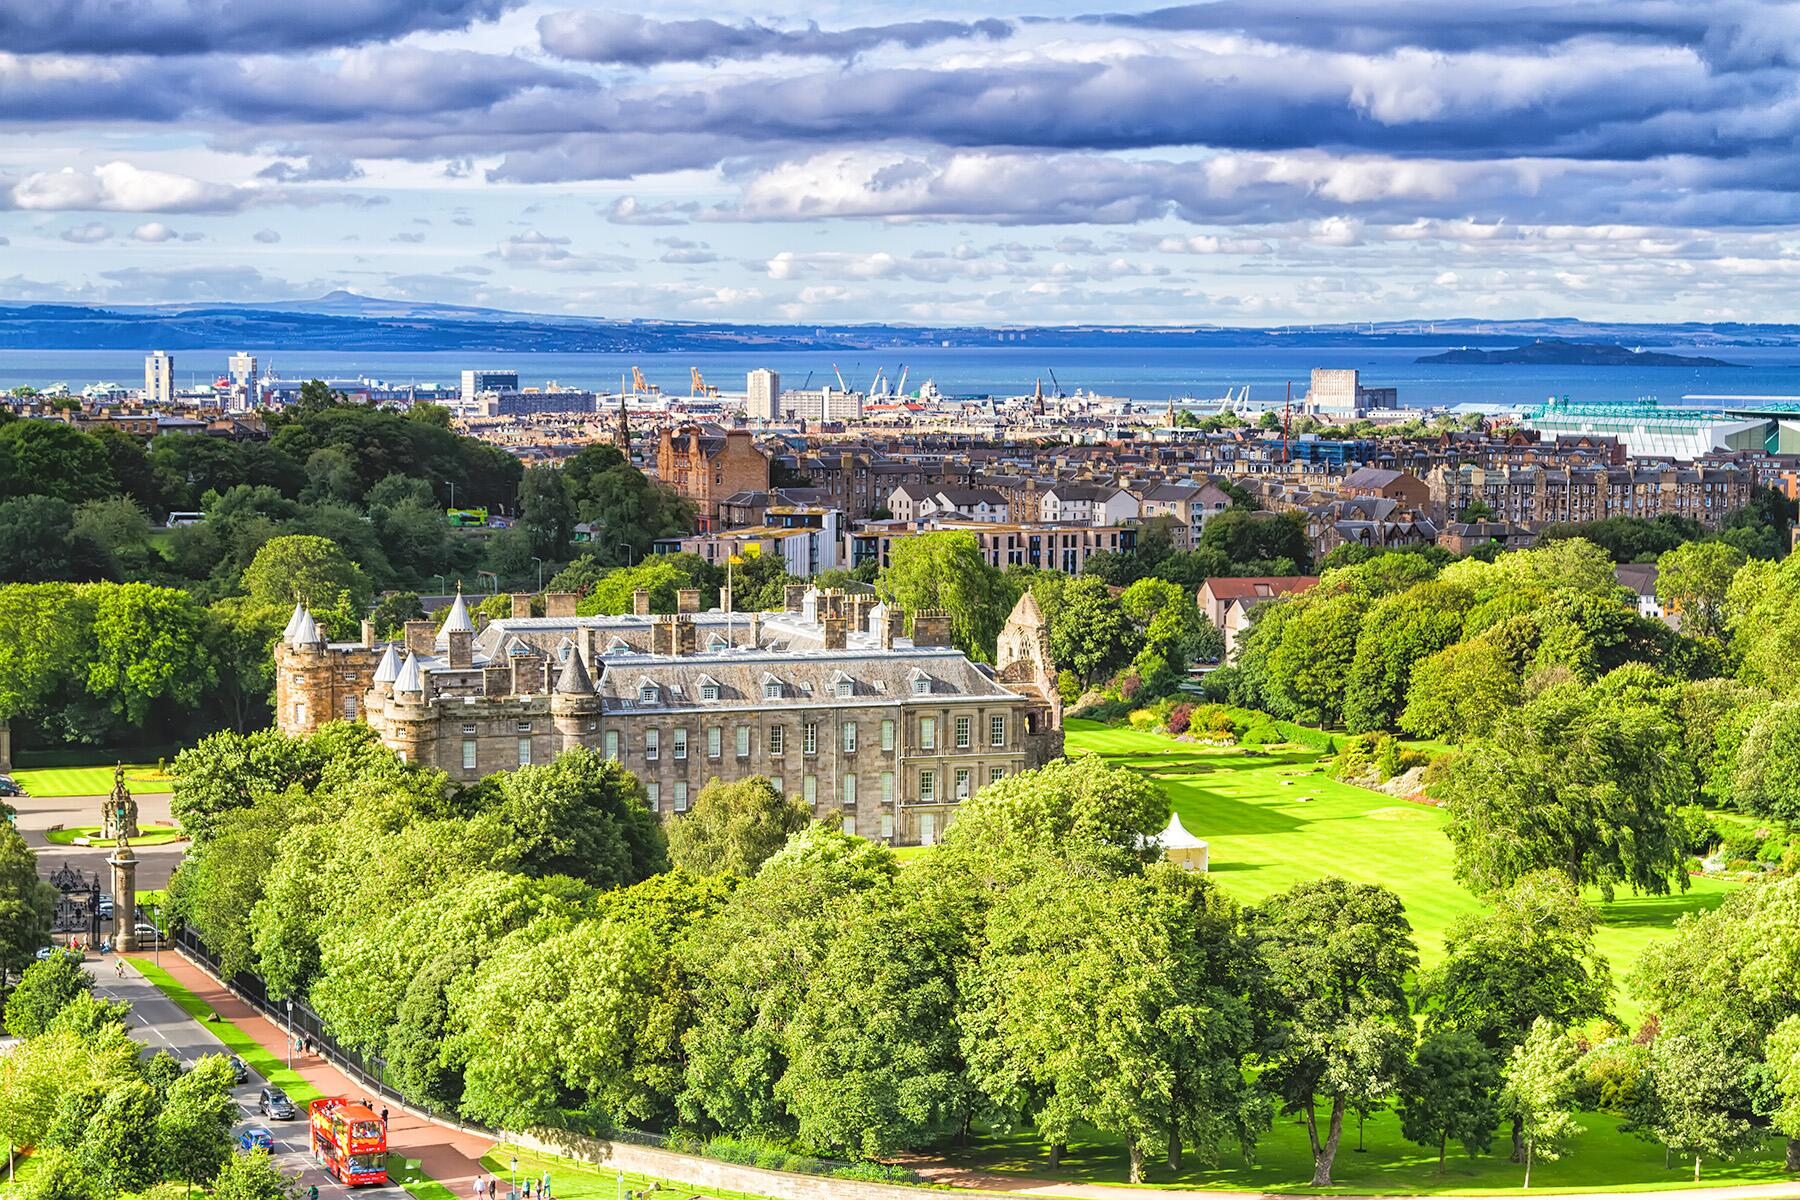 <a href='https://www.fodors.com/world/europe/scotland/edinburgh-and-the-lothians/experiences/news/photos/best-streets-to-visit-in-edinburgh#'>From &quot;Wander Down Edinburgh's 10 Most Magical Streets&quot;</a>